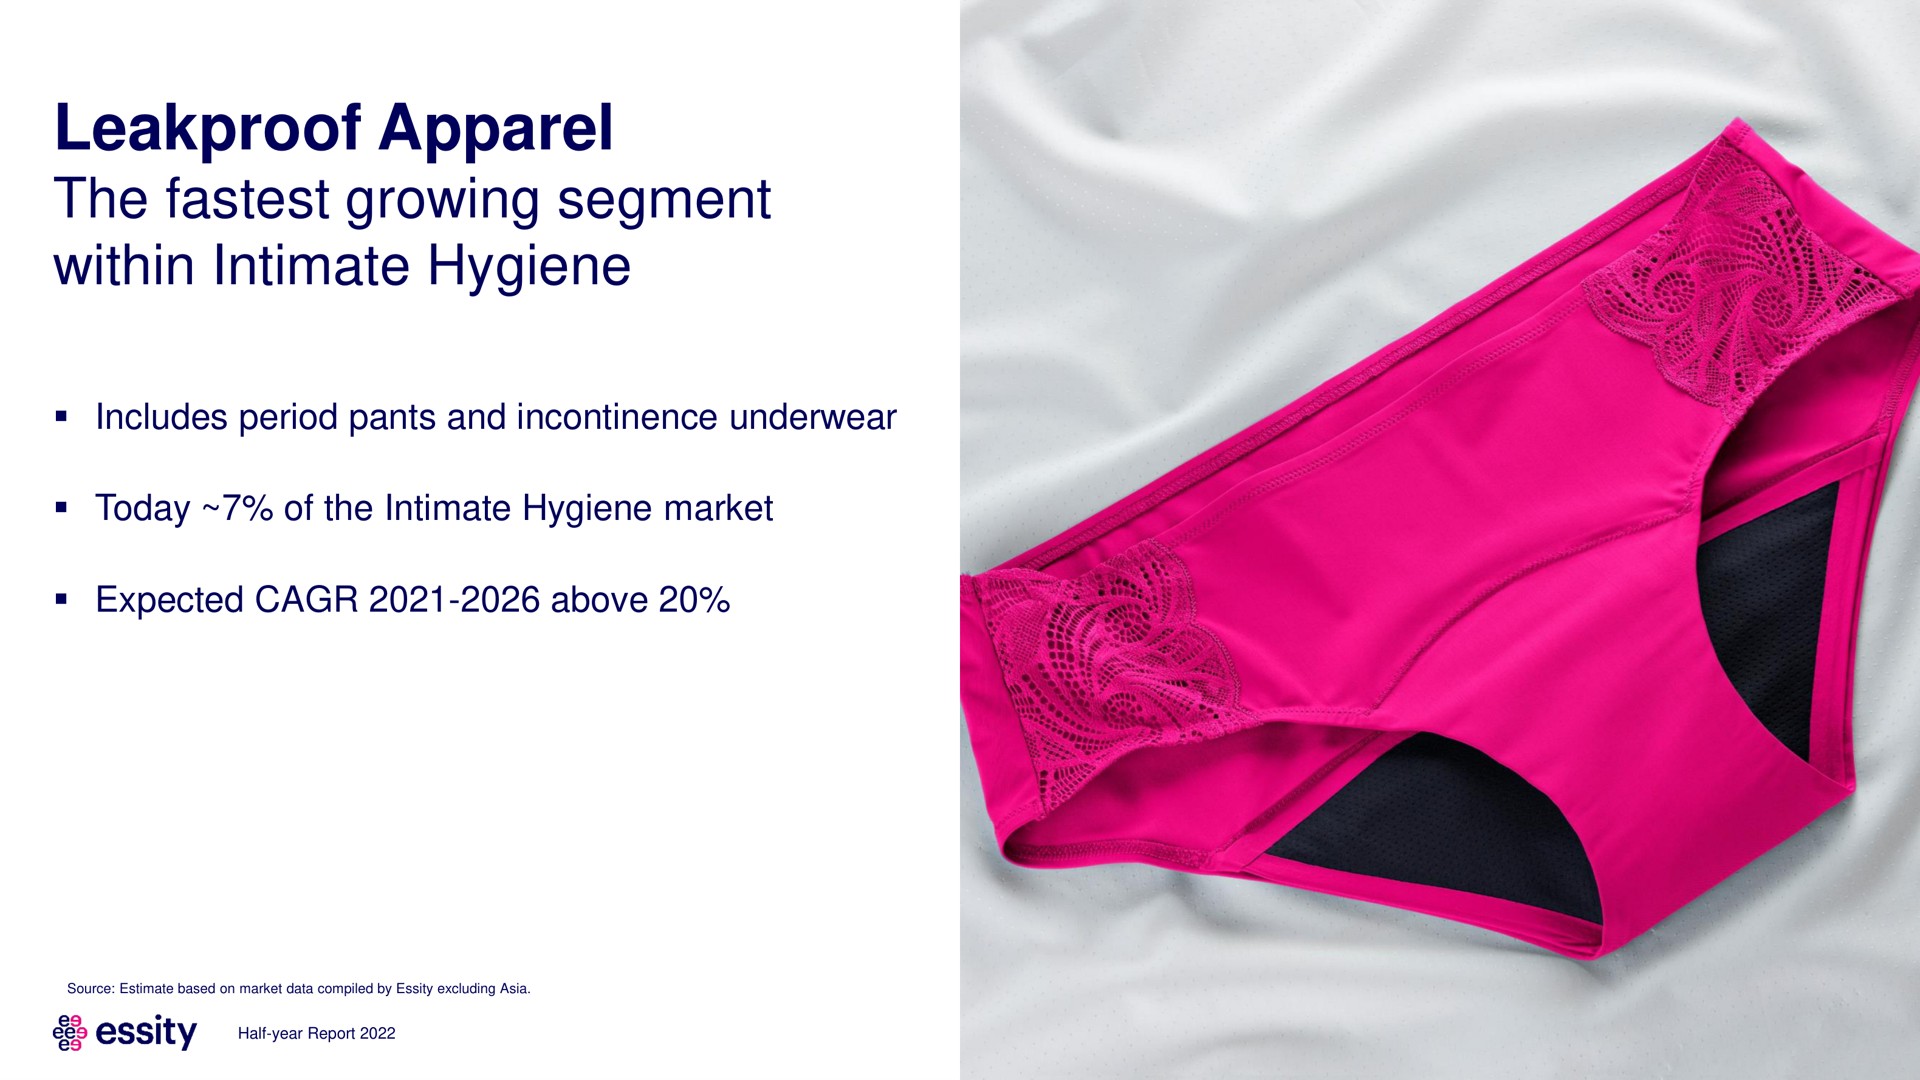 leakproof apparel the growing segment within intimate hygiene | Essity